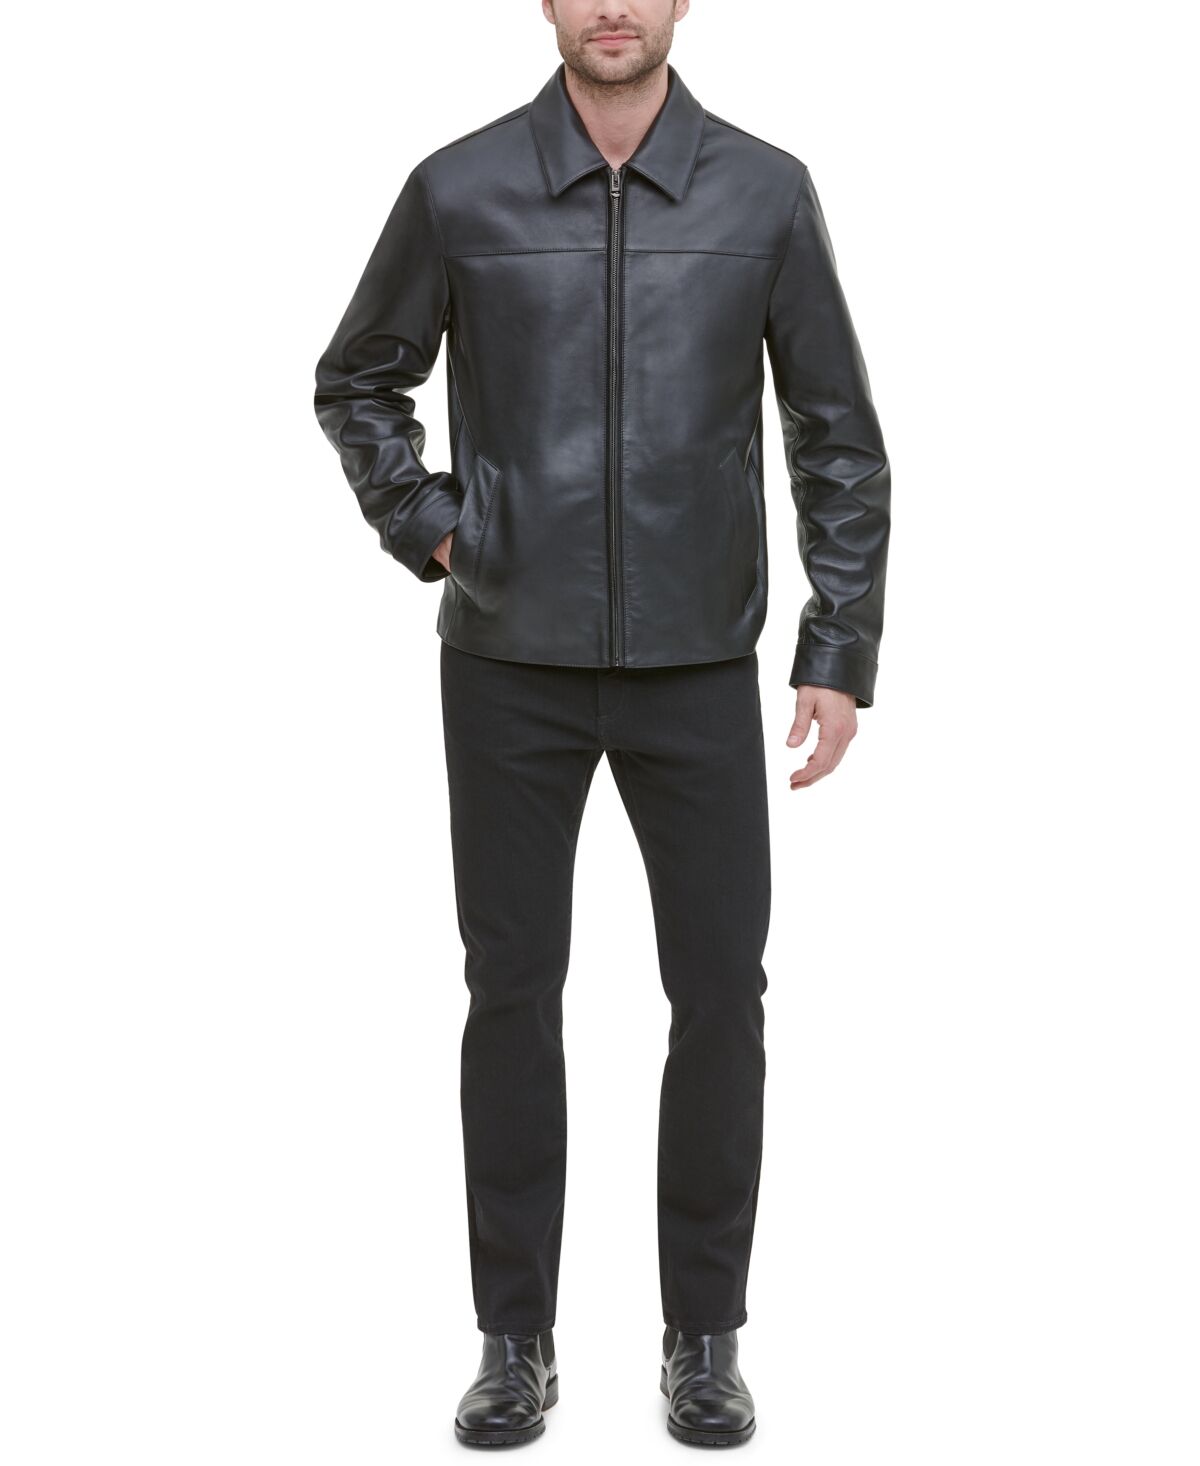 Cole Haan Men's Leather Jacket, Created for Macy's - Black